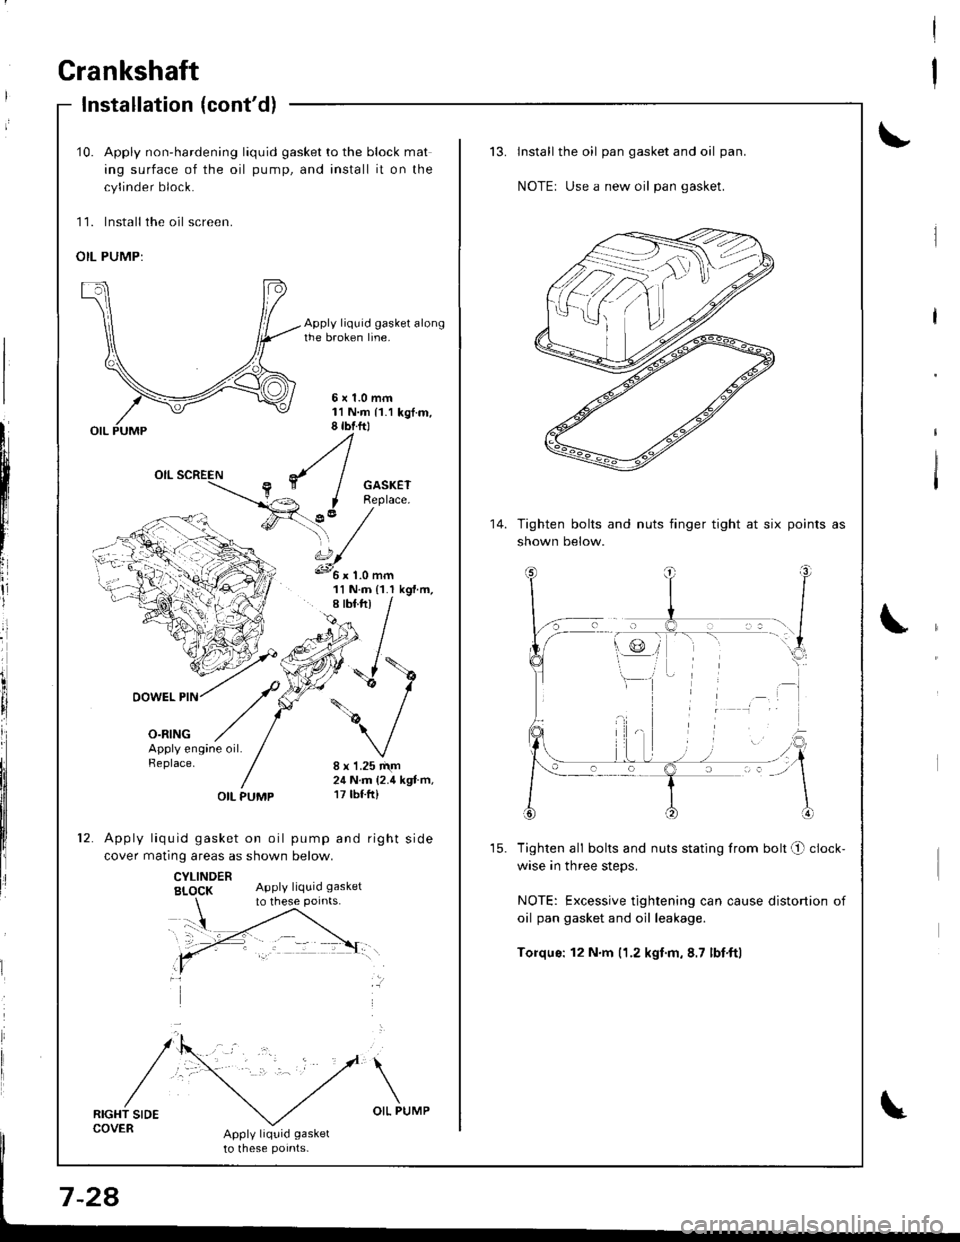 HONDA INTEGRA 1998 4.G Workshop Manual Crankshaft
Installation (contd)
I
I
t
l;I
I
fi,
\
10. Apply non-hardening liquid gasket to the block mat
ing surface of the oil pump, and install it on the
cylinder block.
11. lnstall the oil screen.